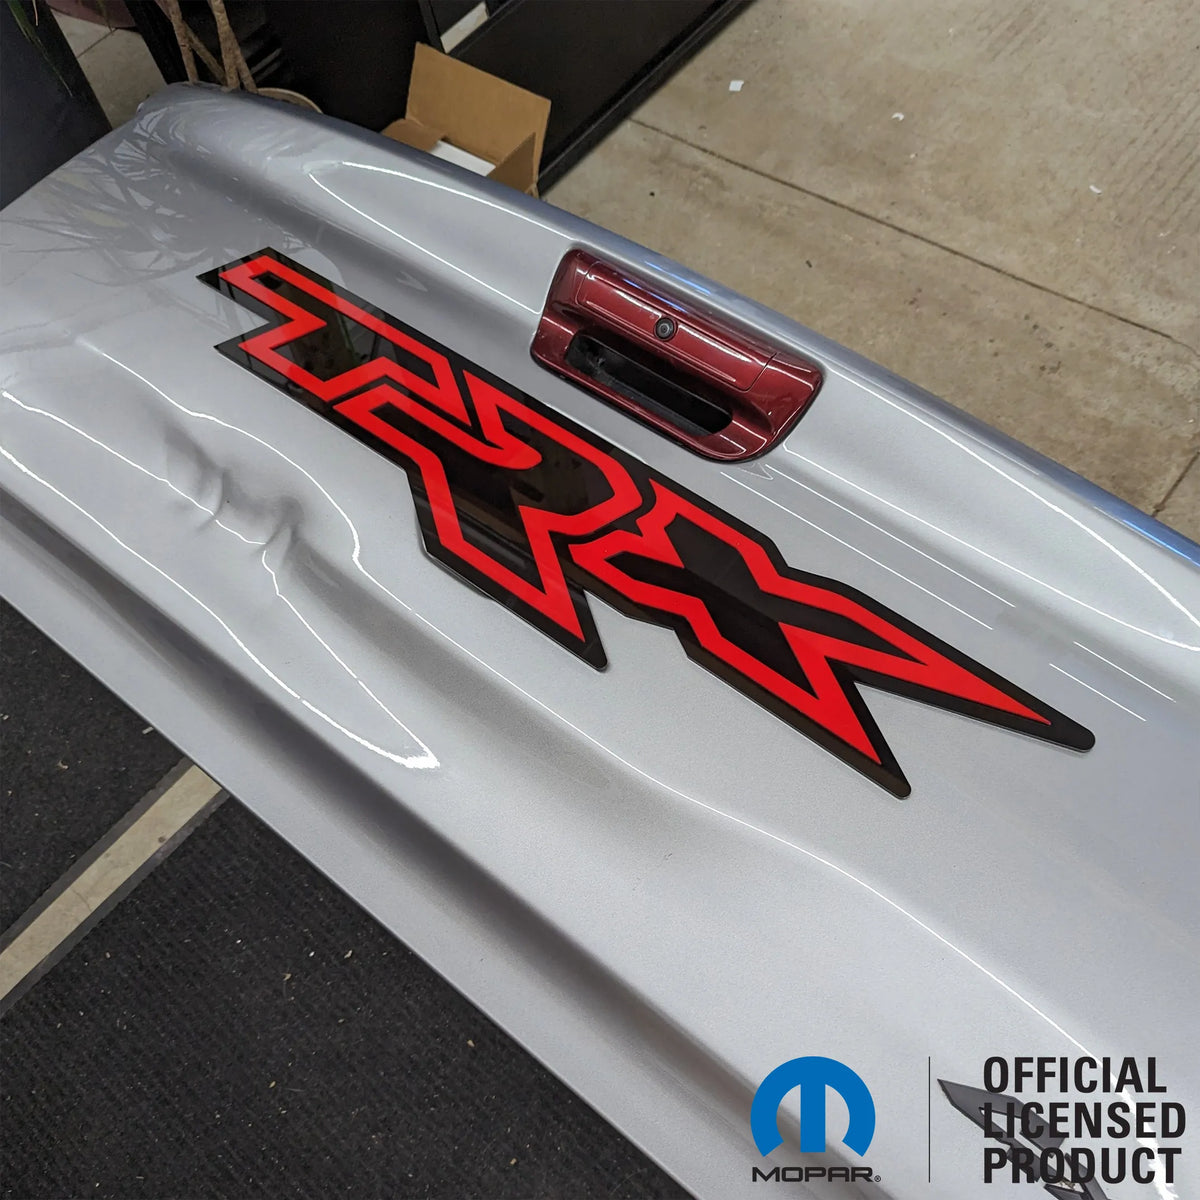 XL TRX Tailgate Badge - Adhesive Tape Mounting - Multiple Colors Available - Officially Licensed Product